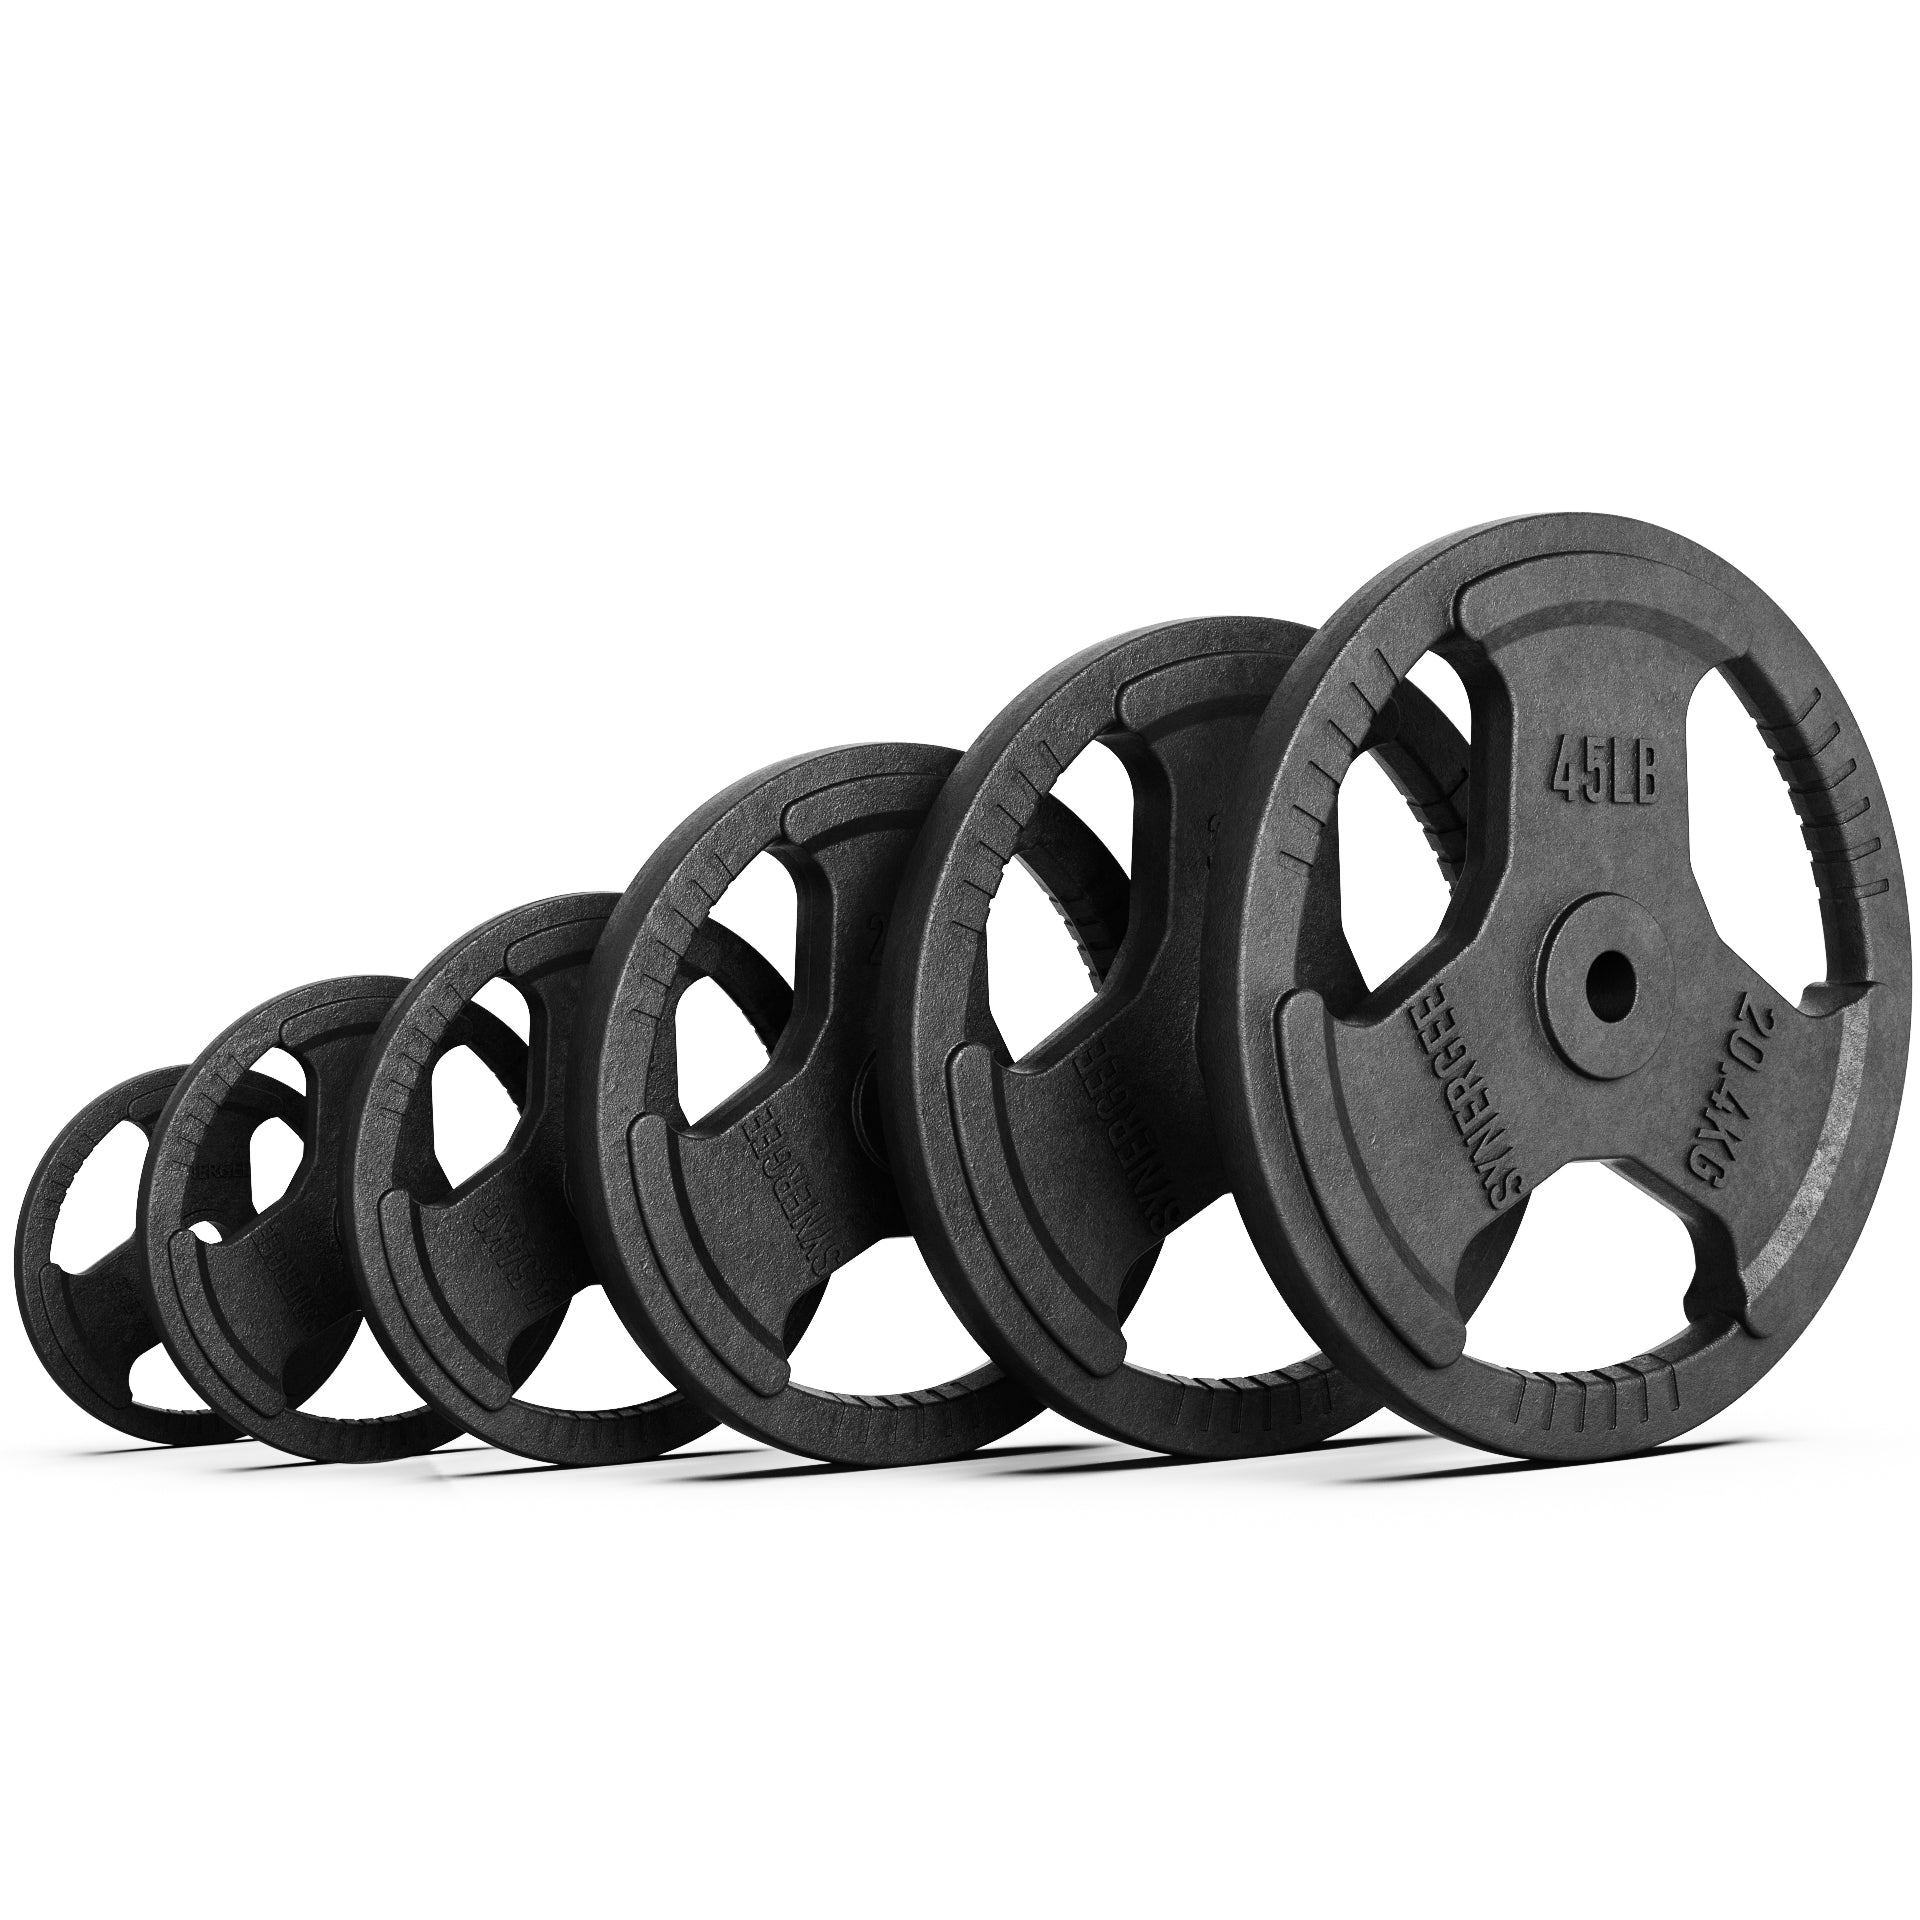 Synergee 1 inch Cast Iron Weight Plates, 5lb - Pair